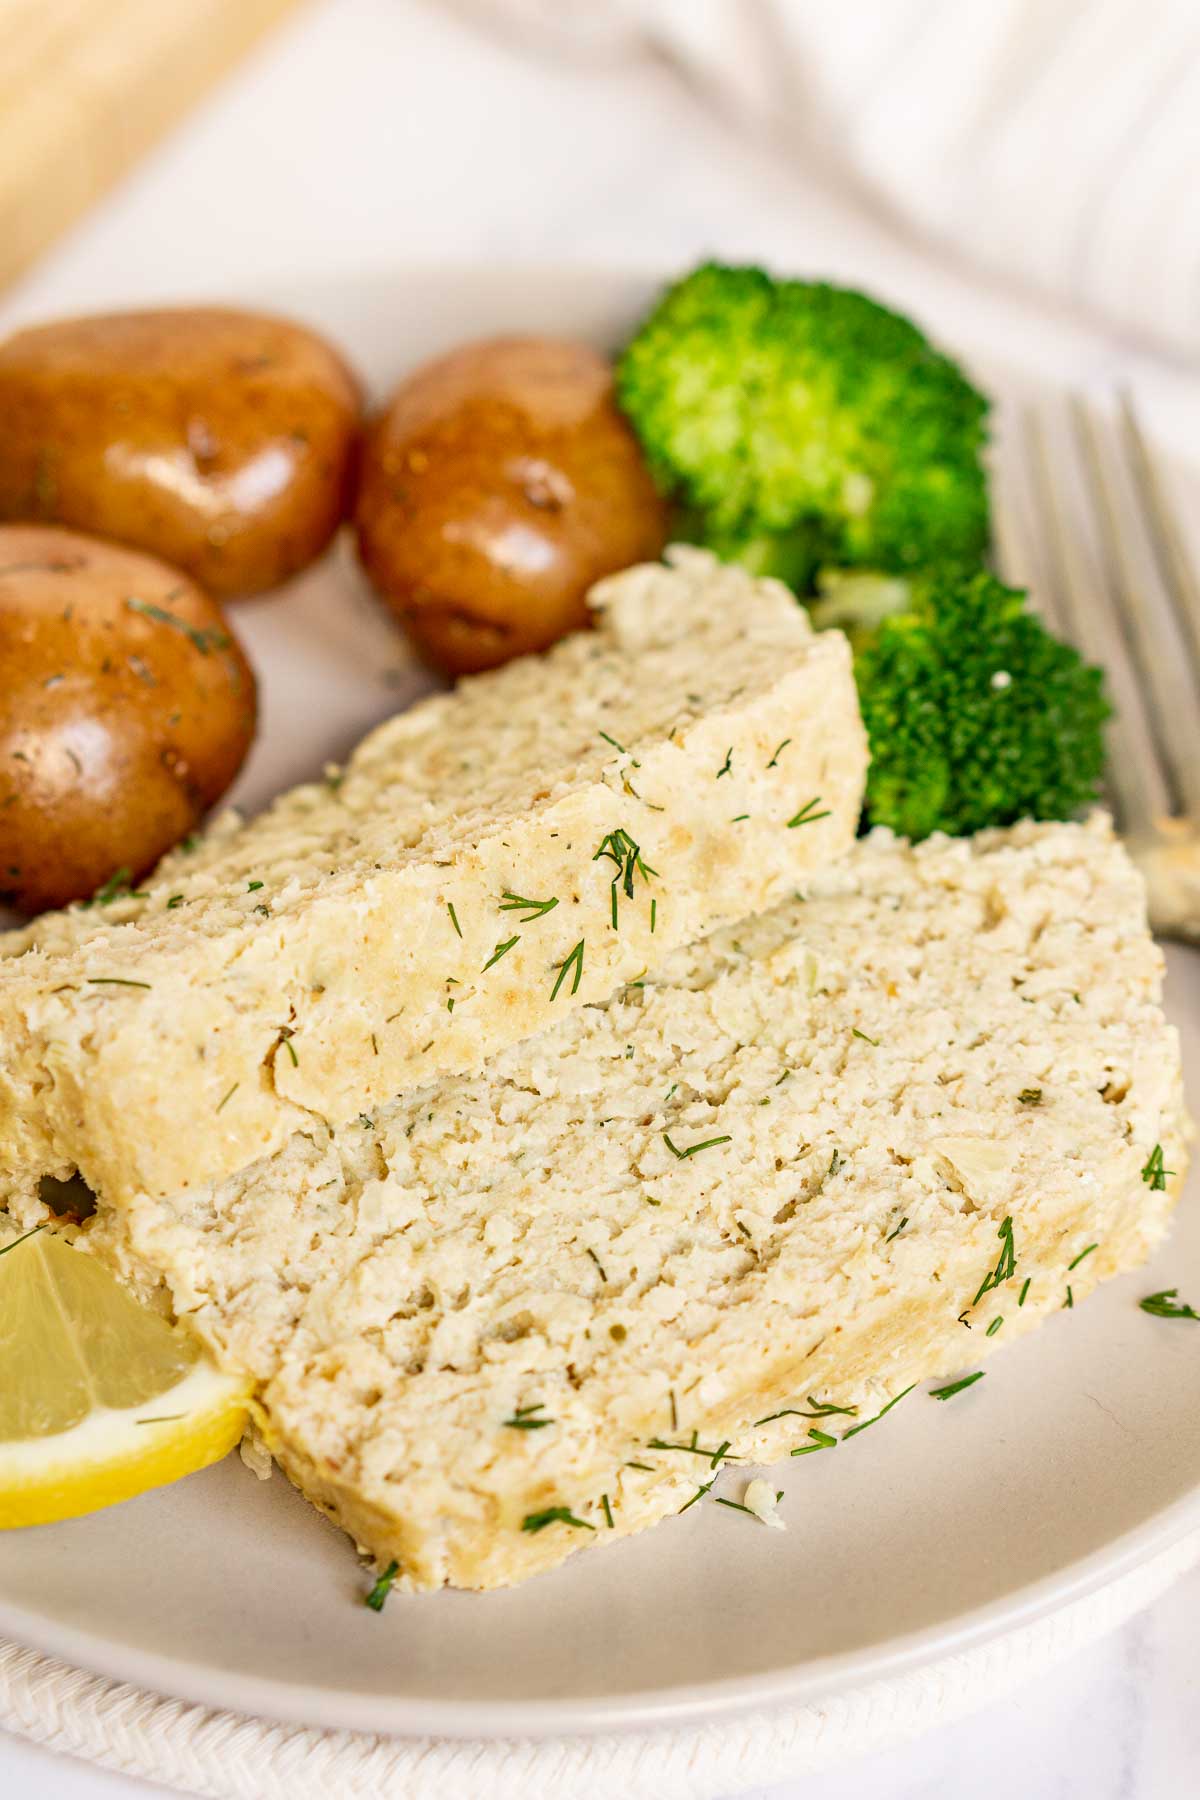 Slices of fish loaf on a plate with potatoes and broccoli